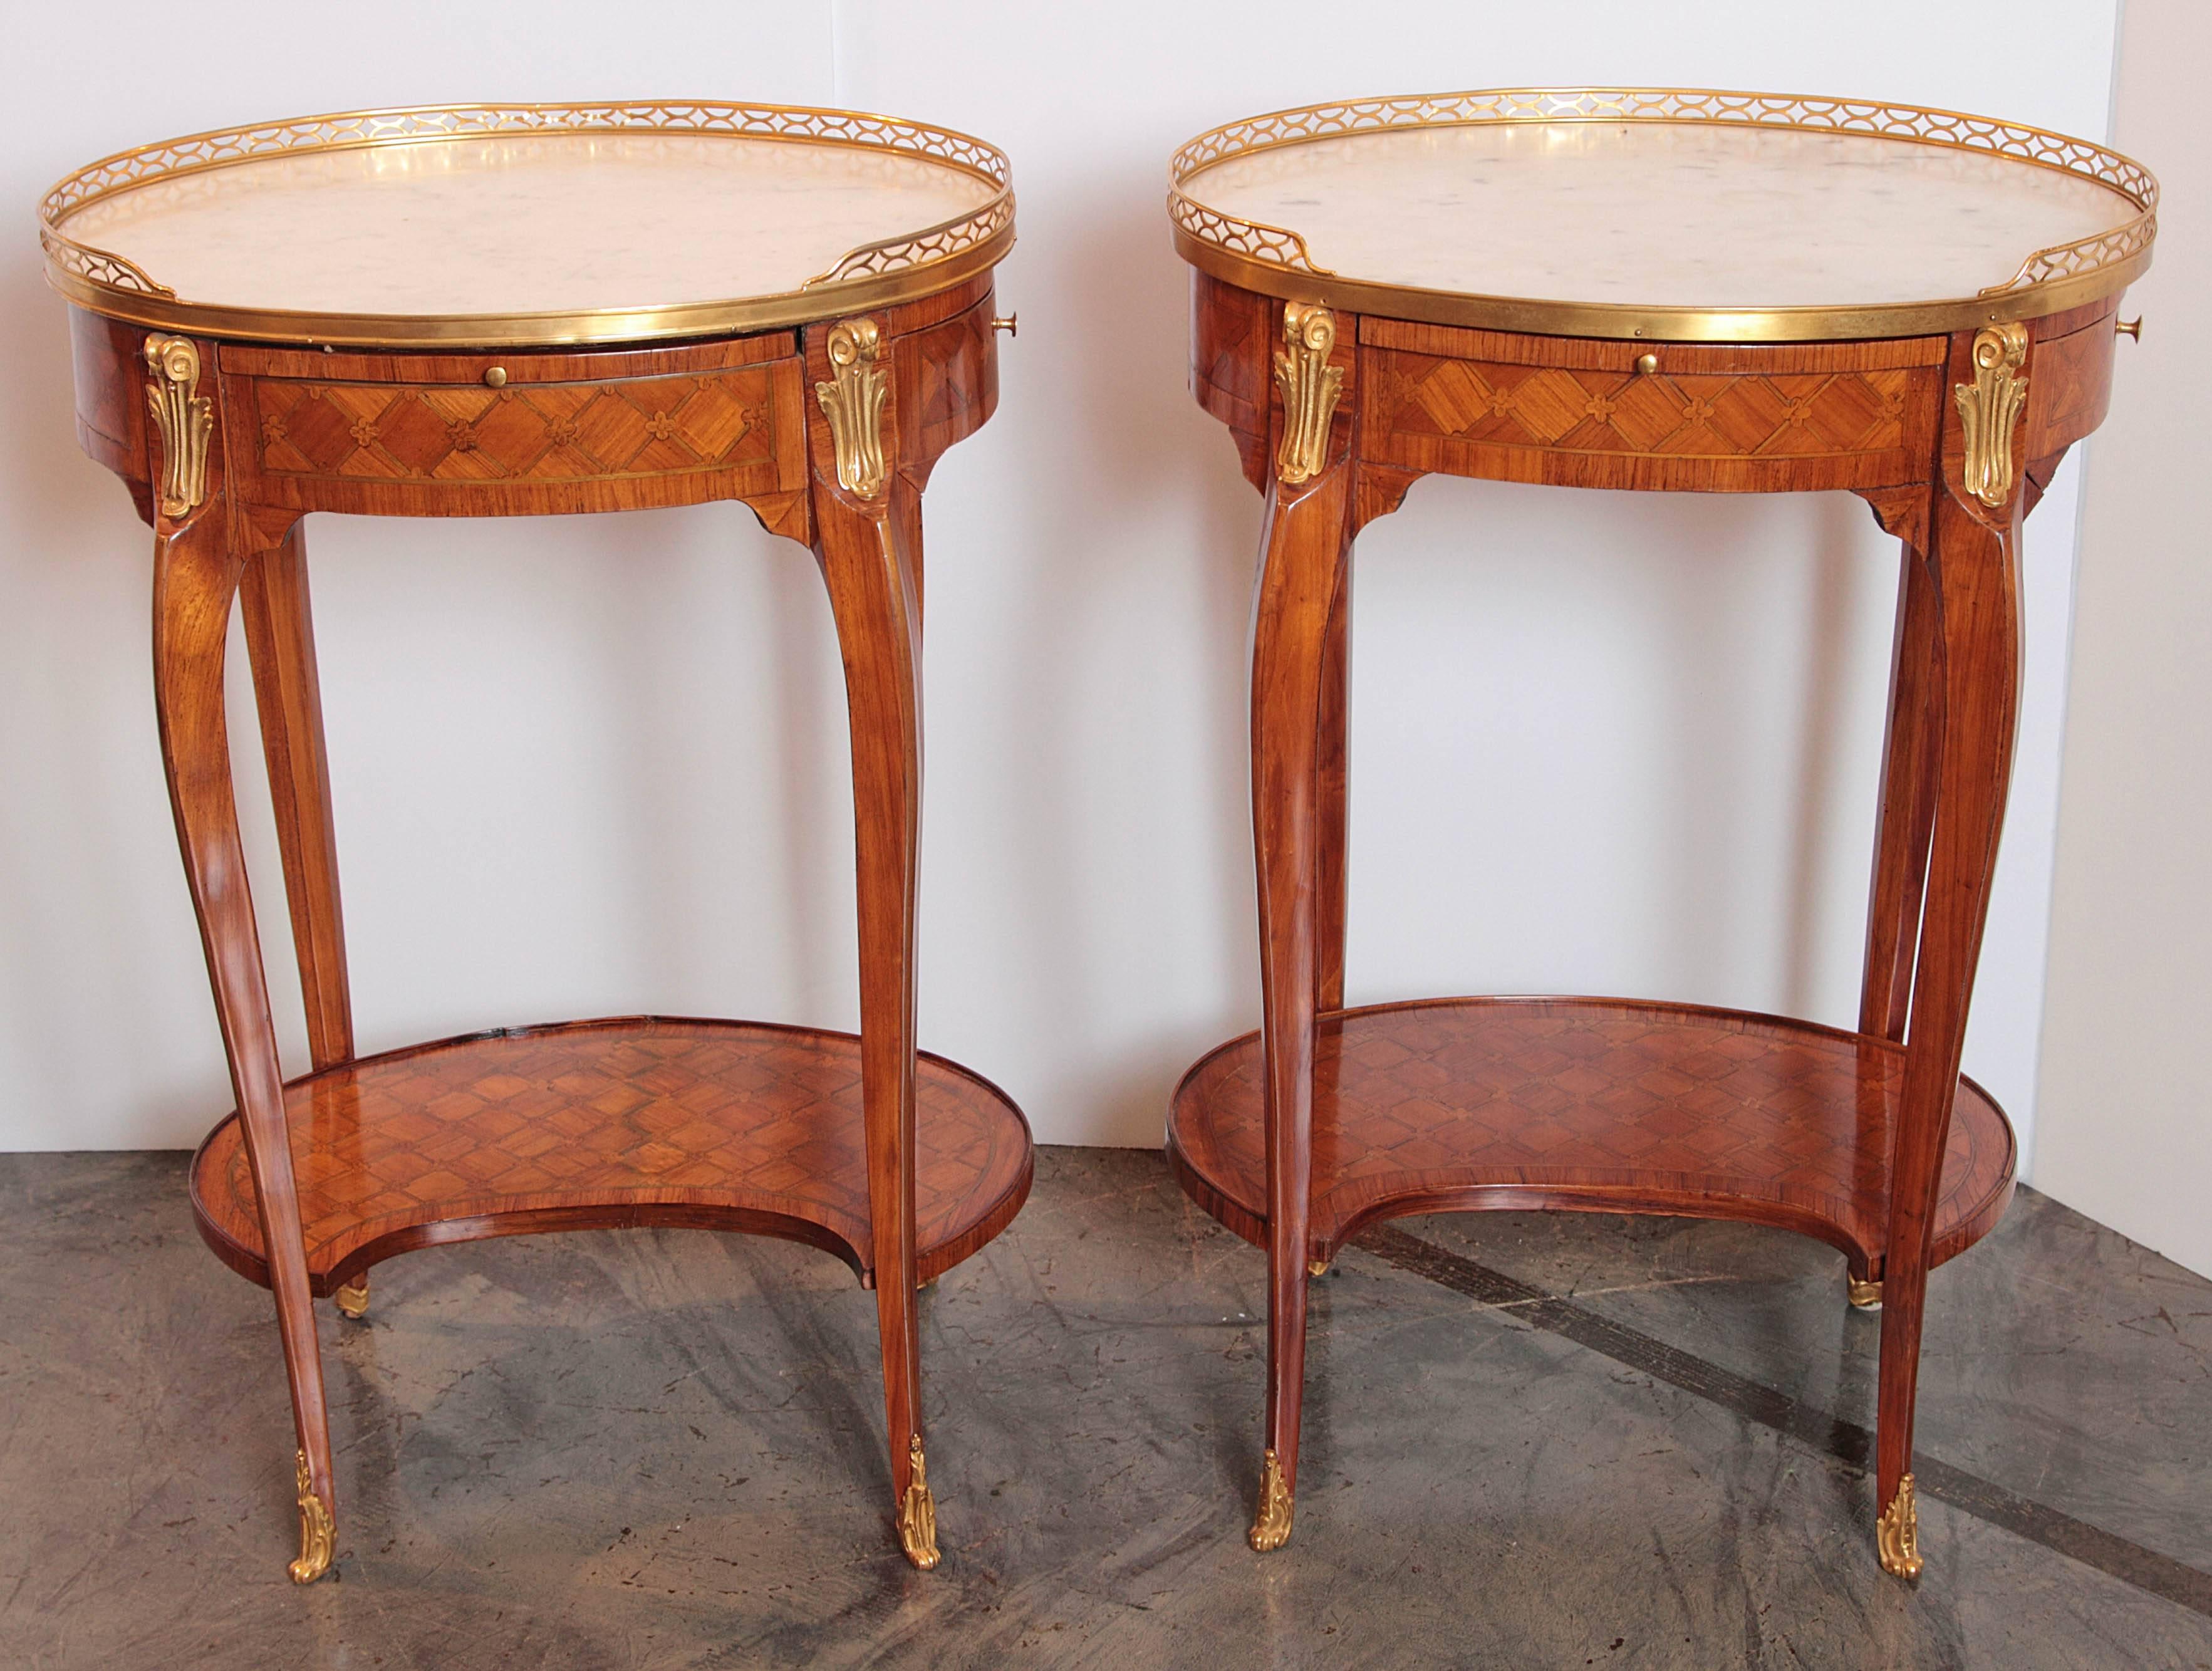 Pair of fine early 19th century French Louis XVI marble-topped kingwood side tables. Parquetry design Single drawer with leather tier pull-out.